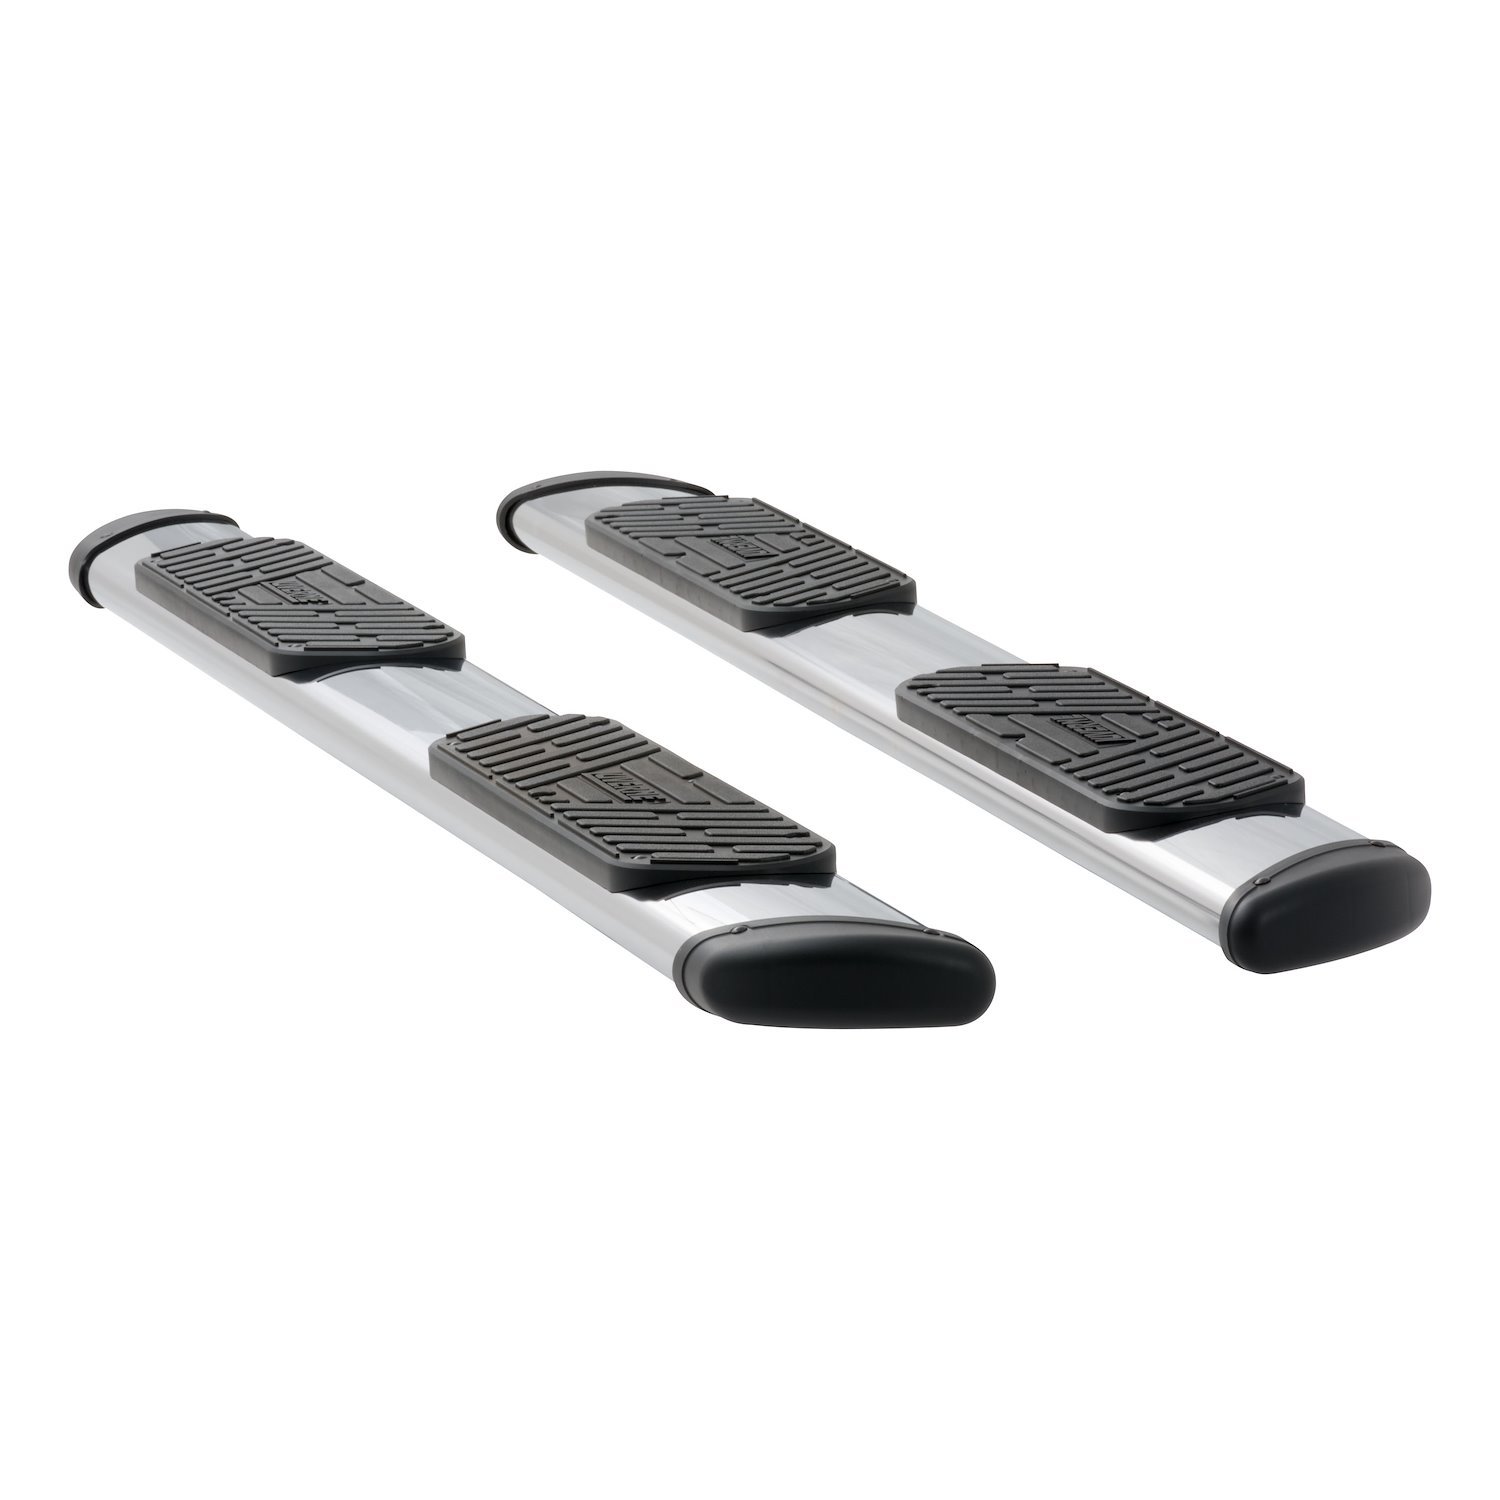 477088-401731 Regal 7 Polish Stainless 88 in. Oval Steps, XD Brackets Fits Select Ford F-Series Crew